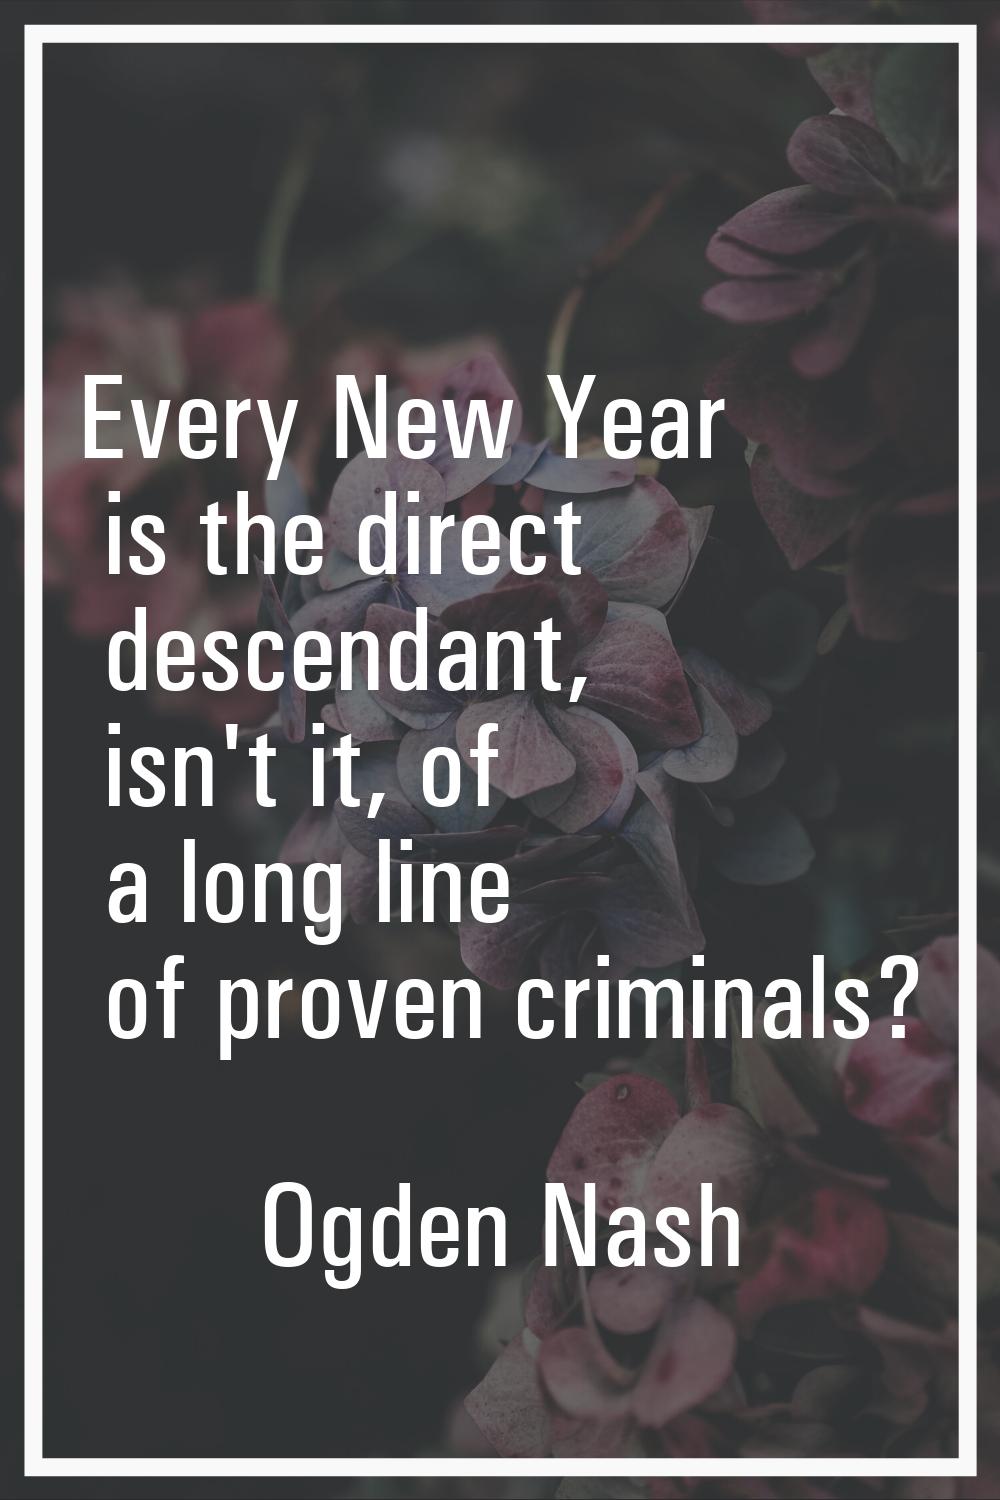 Every New Year is the direct descendant, isn't it, of a long line of proven criminals?